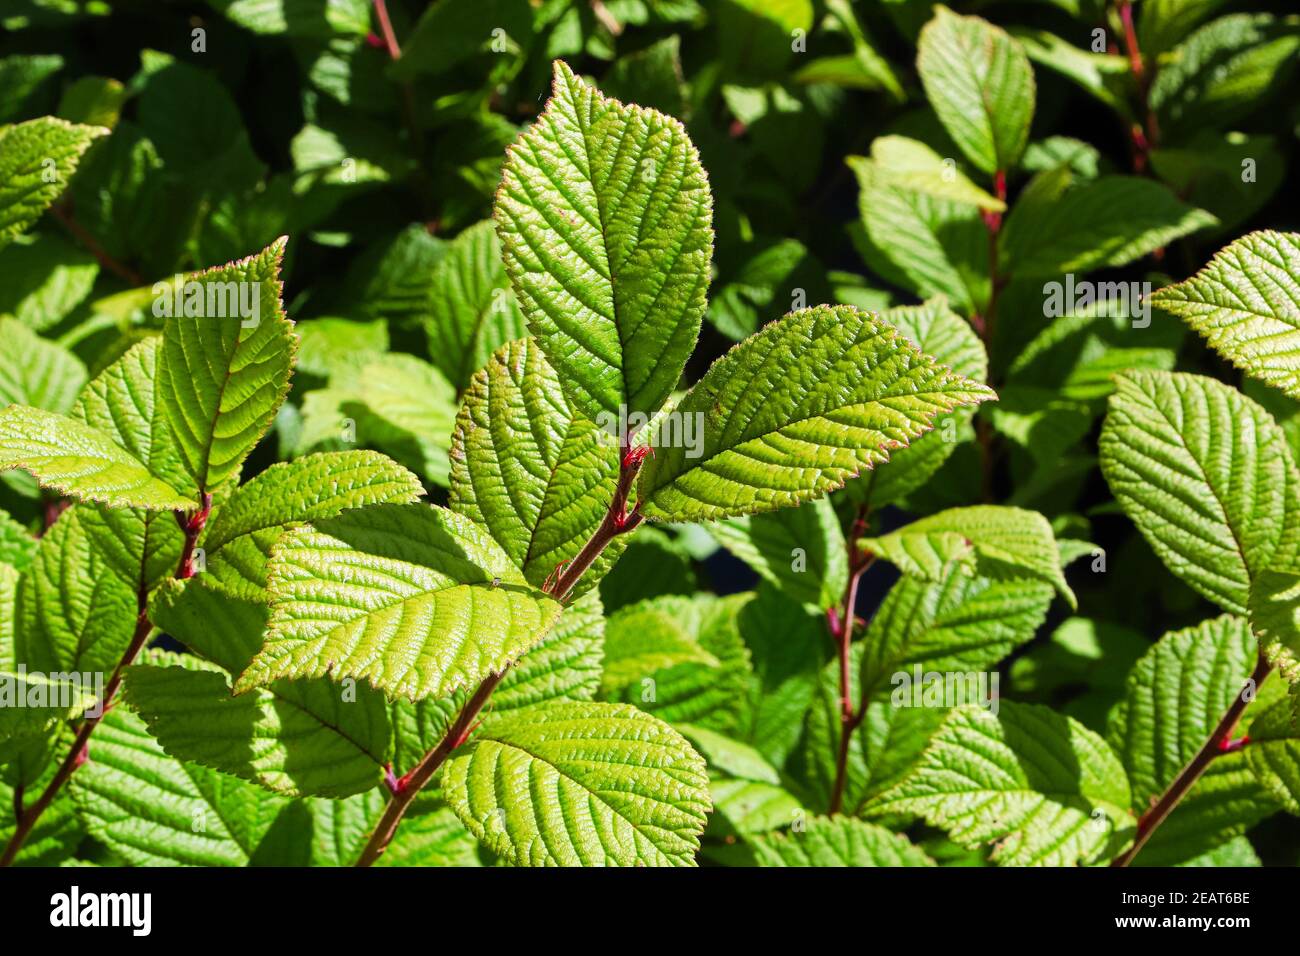 Background of a nanking cherry shrub with just leaves Stock Photo